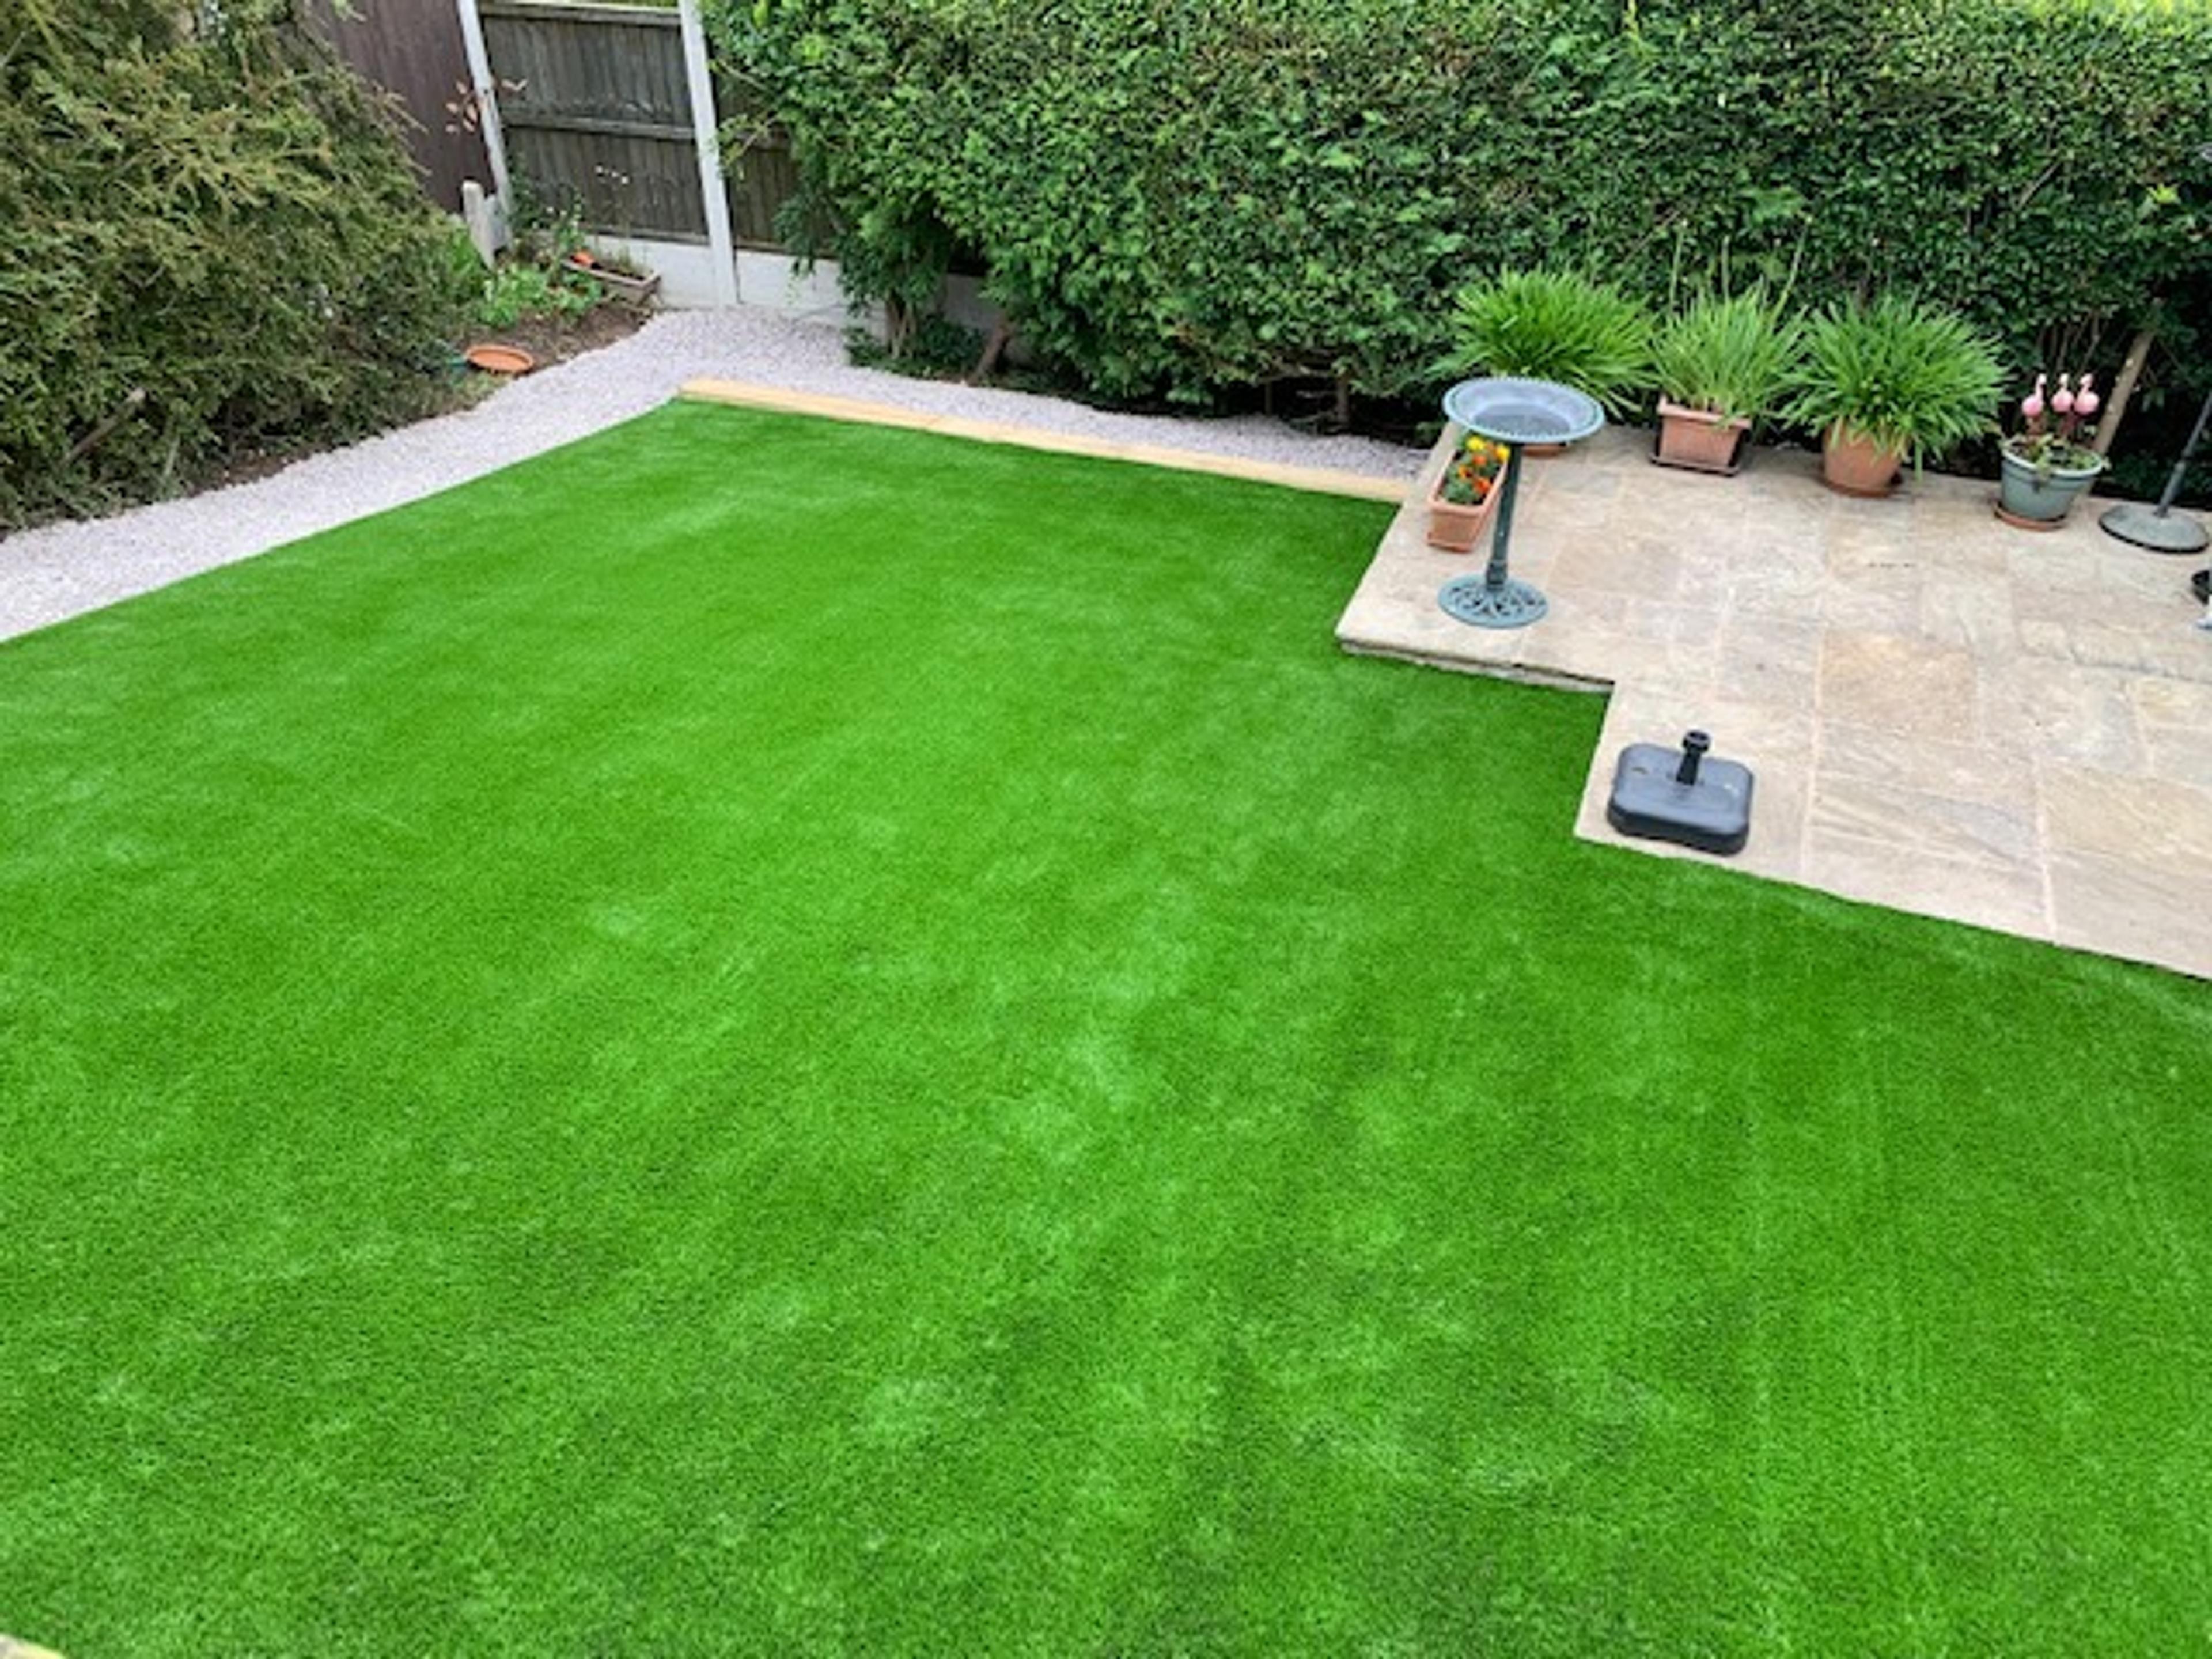 Artificial grass supply & installation Dronfield, South Yorkshire, S18